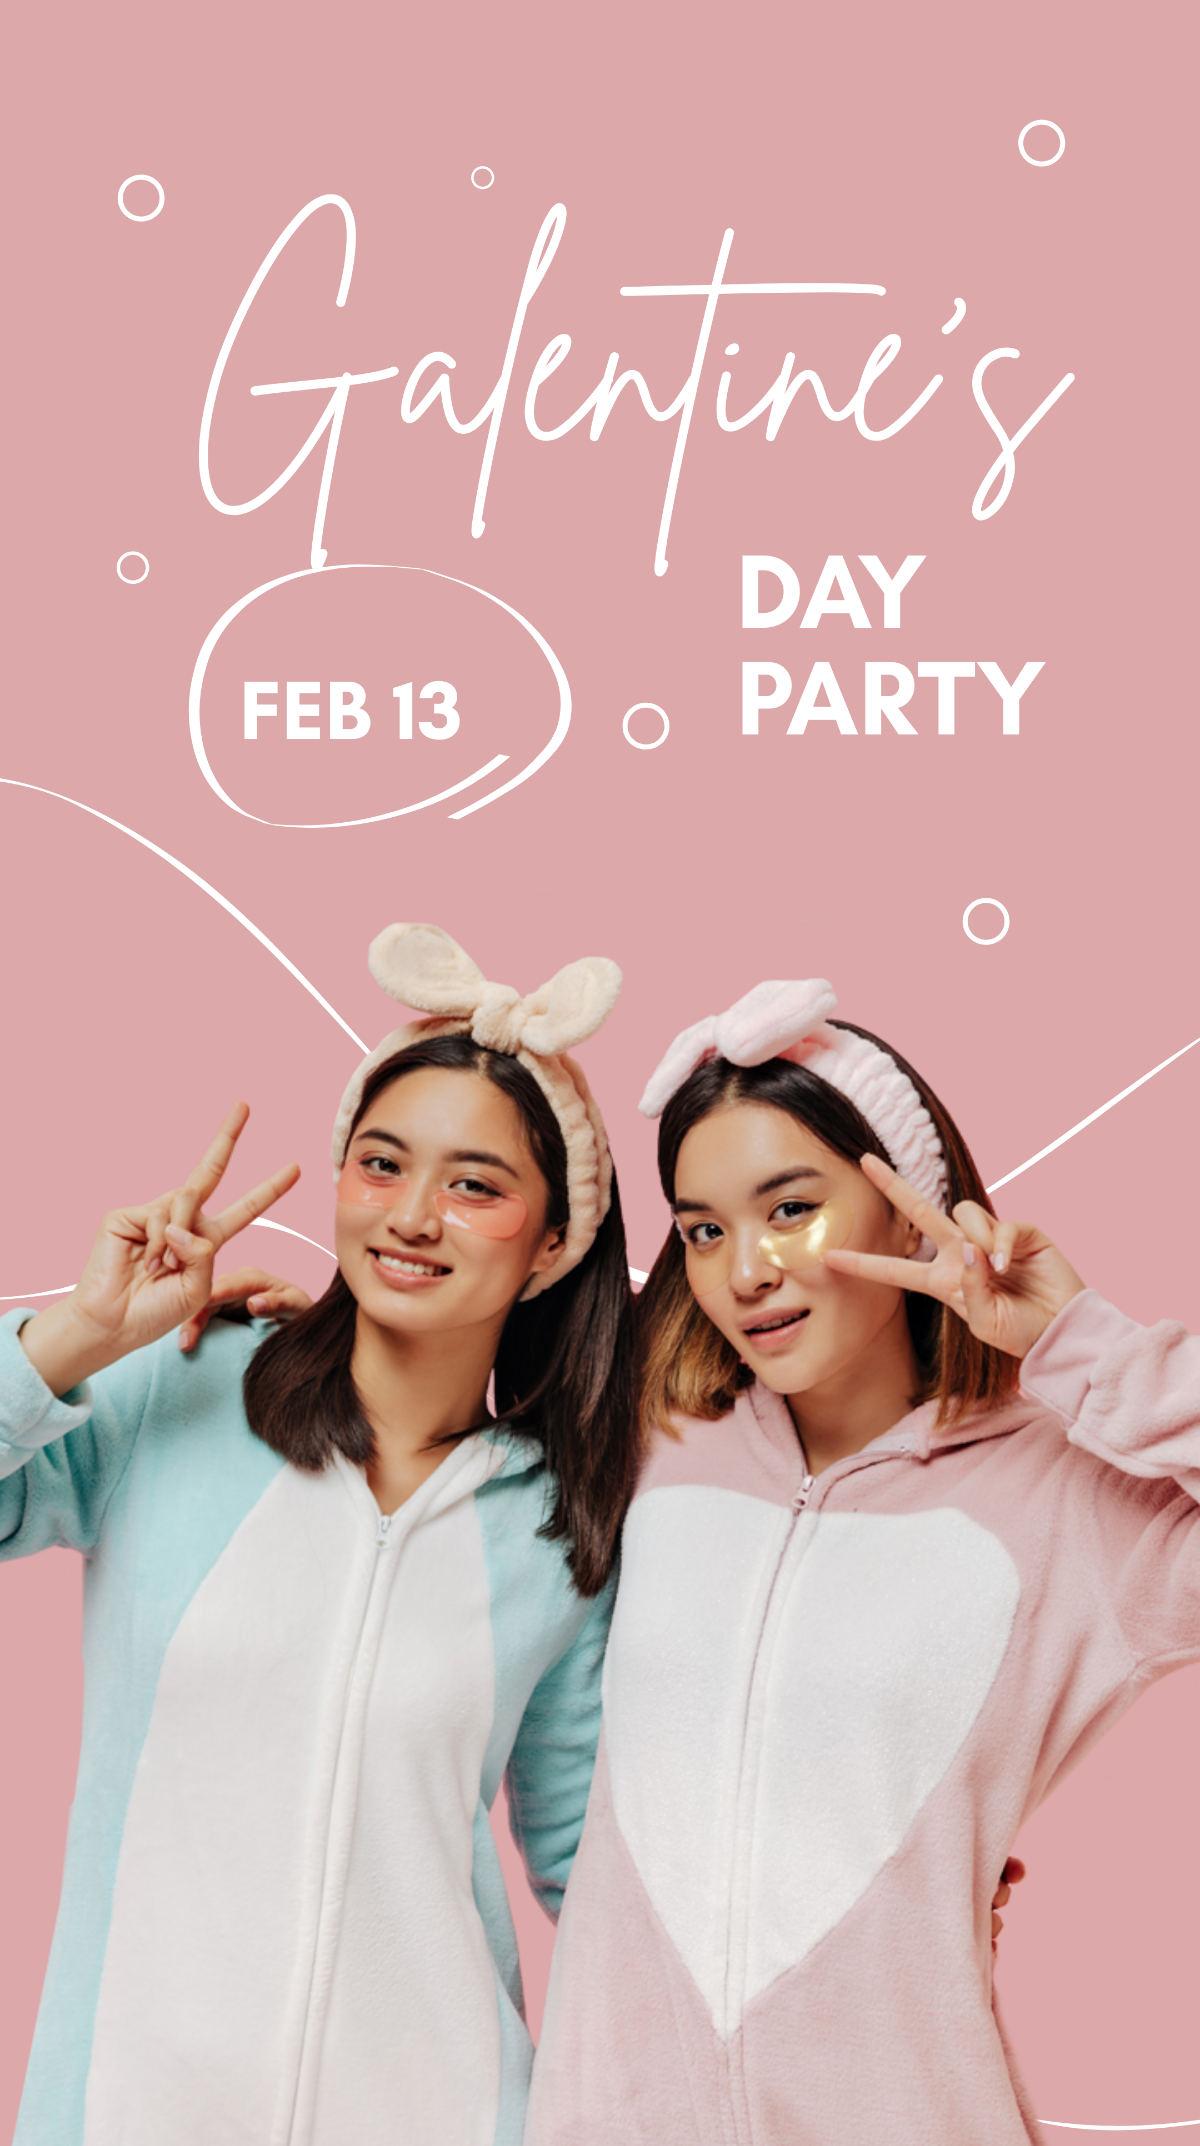 Galentines Day Party Whatsapp Post